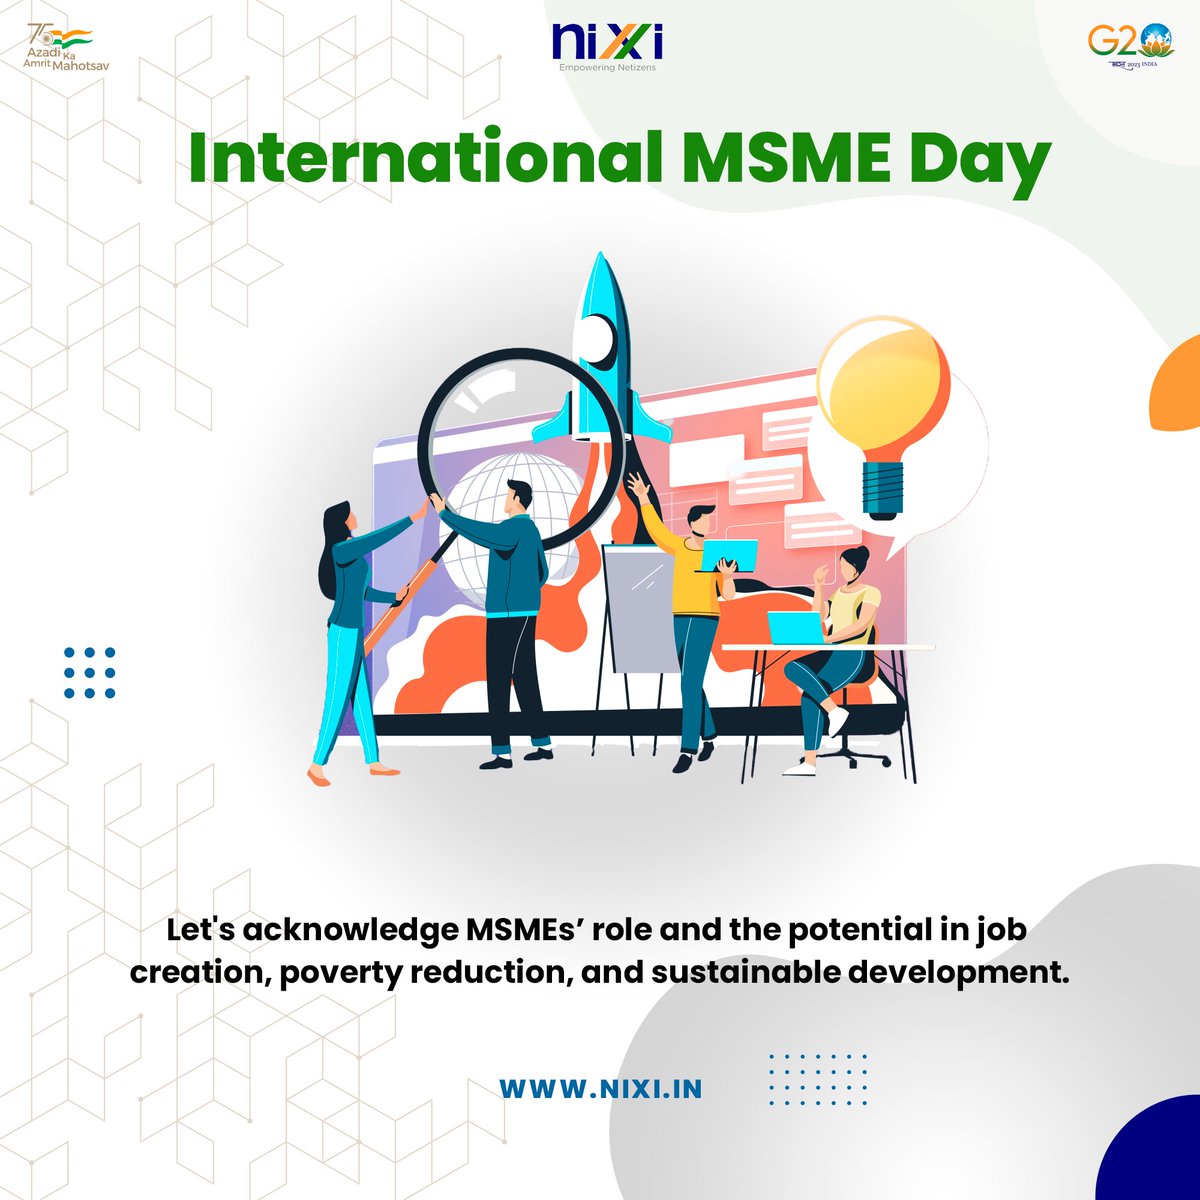 Today, we mark International MSME Day, a celebration of the entrepreneurial spirit that fuels the success of Micro, Small, and Medium Enterprises worldwide. Let's honor their ambition and commitment to creating a positive impact. 
#MSMEDay #EntrepreneurialSpirit